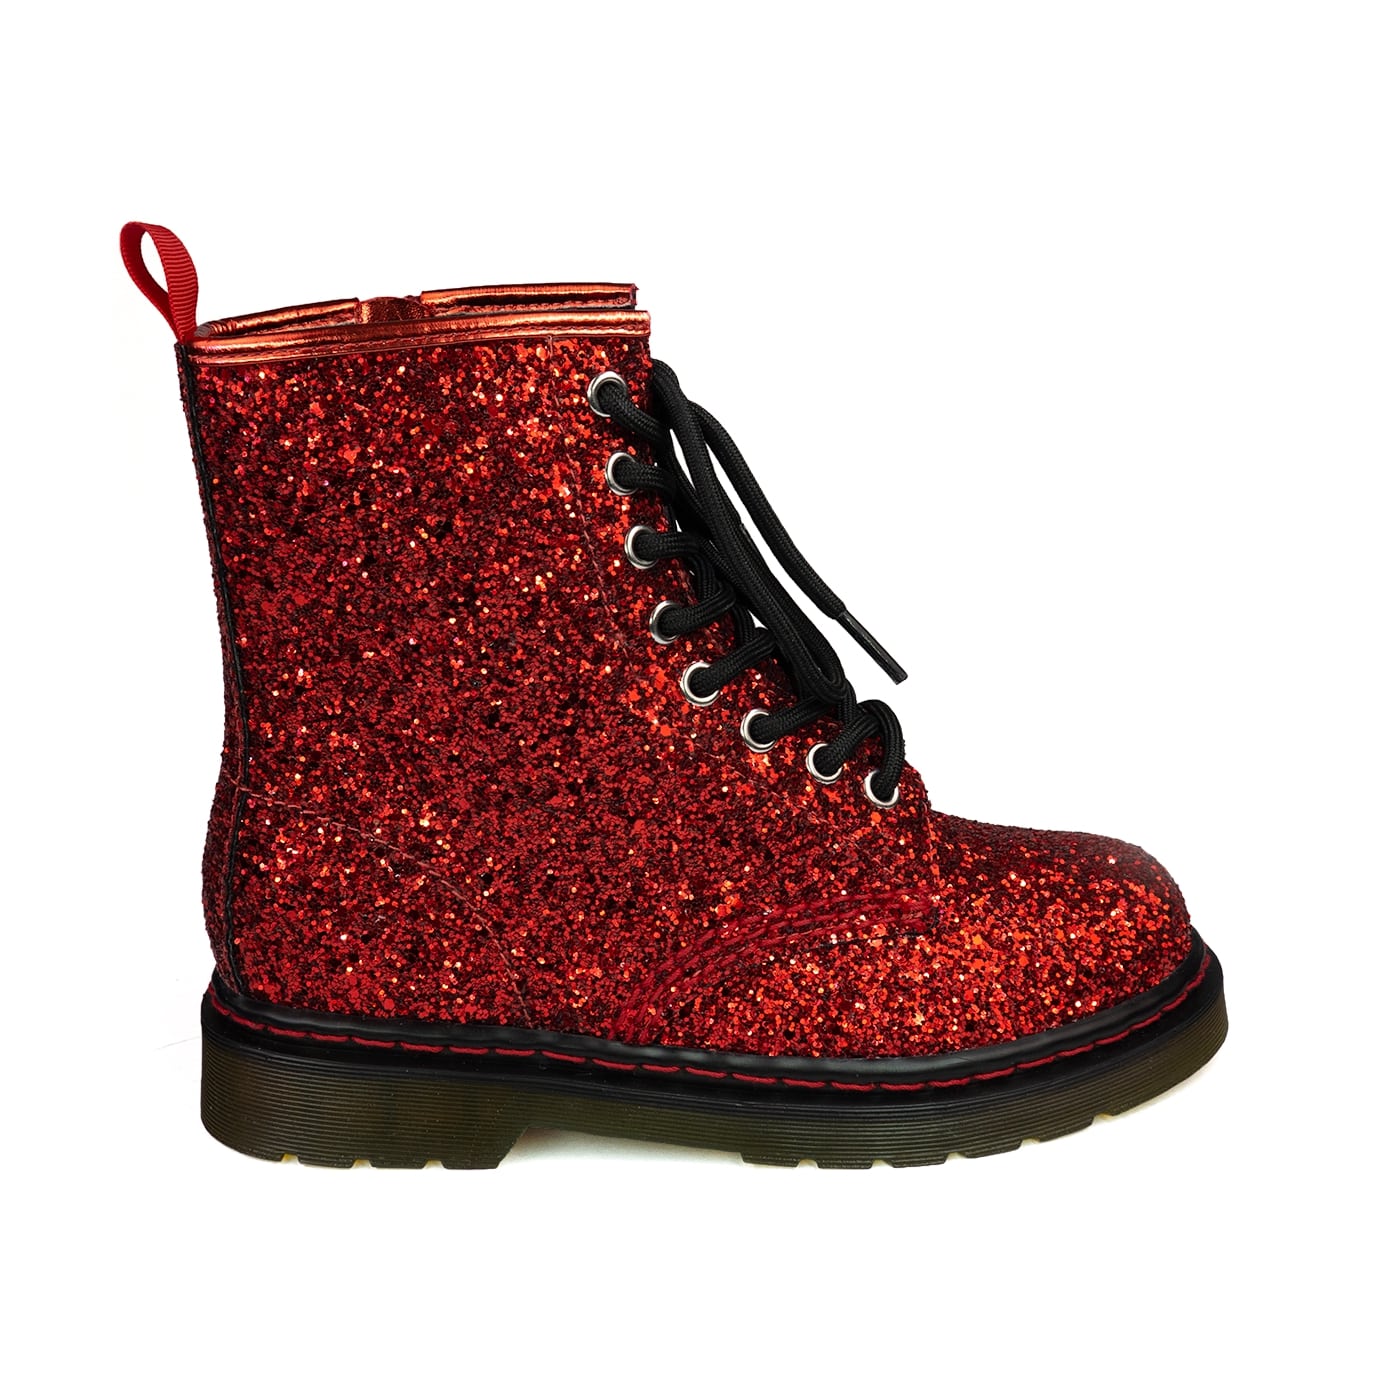 Dorothy Wonder Boots by RainbowsAndFairies.com.au (Red Glitter - Wizard Of Oz - Metallic - Glitter Boots - Combat Boots - Side Zip Boot - Sparkle) - SKU: FW_WONDR_DRTHY_ORG - Pic-04